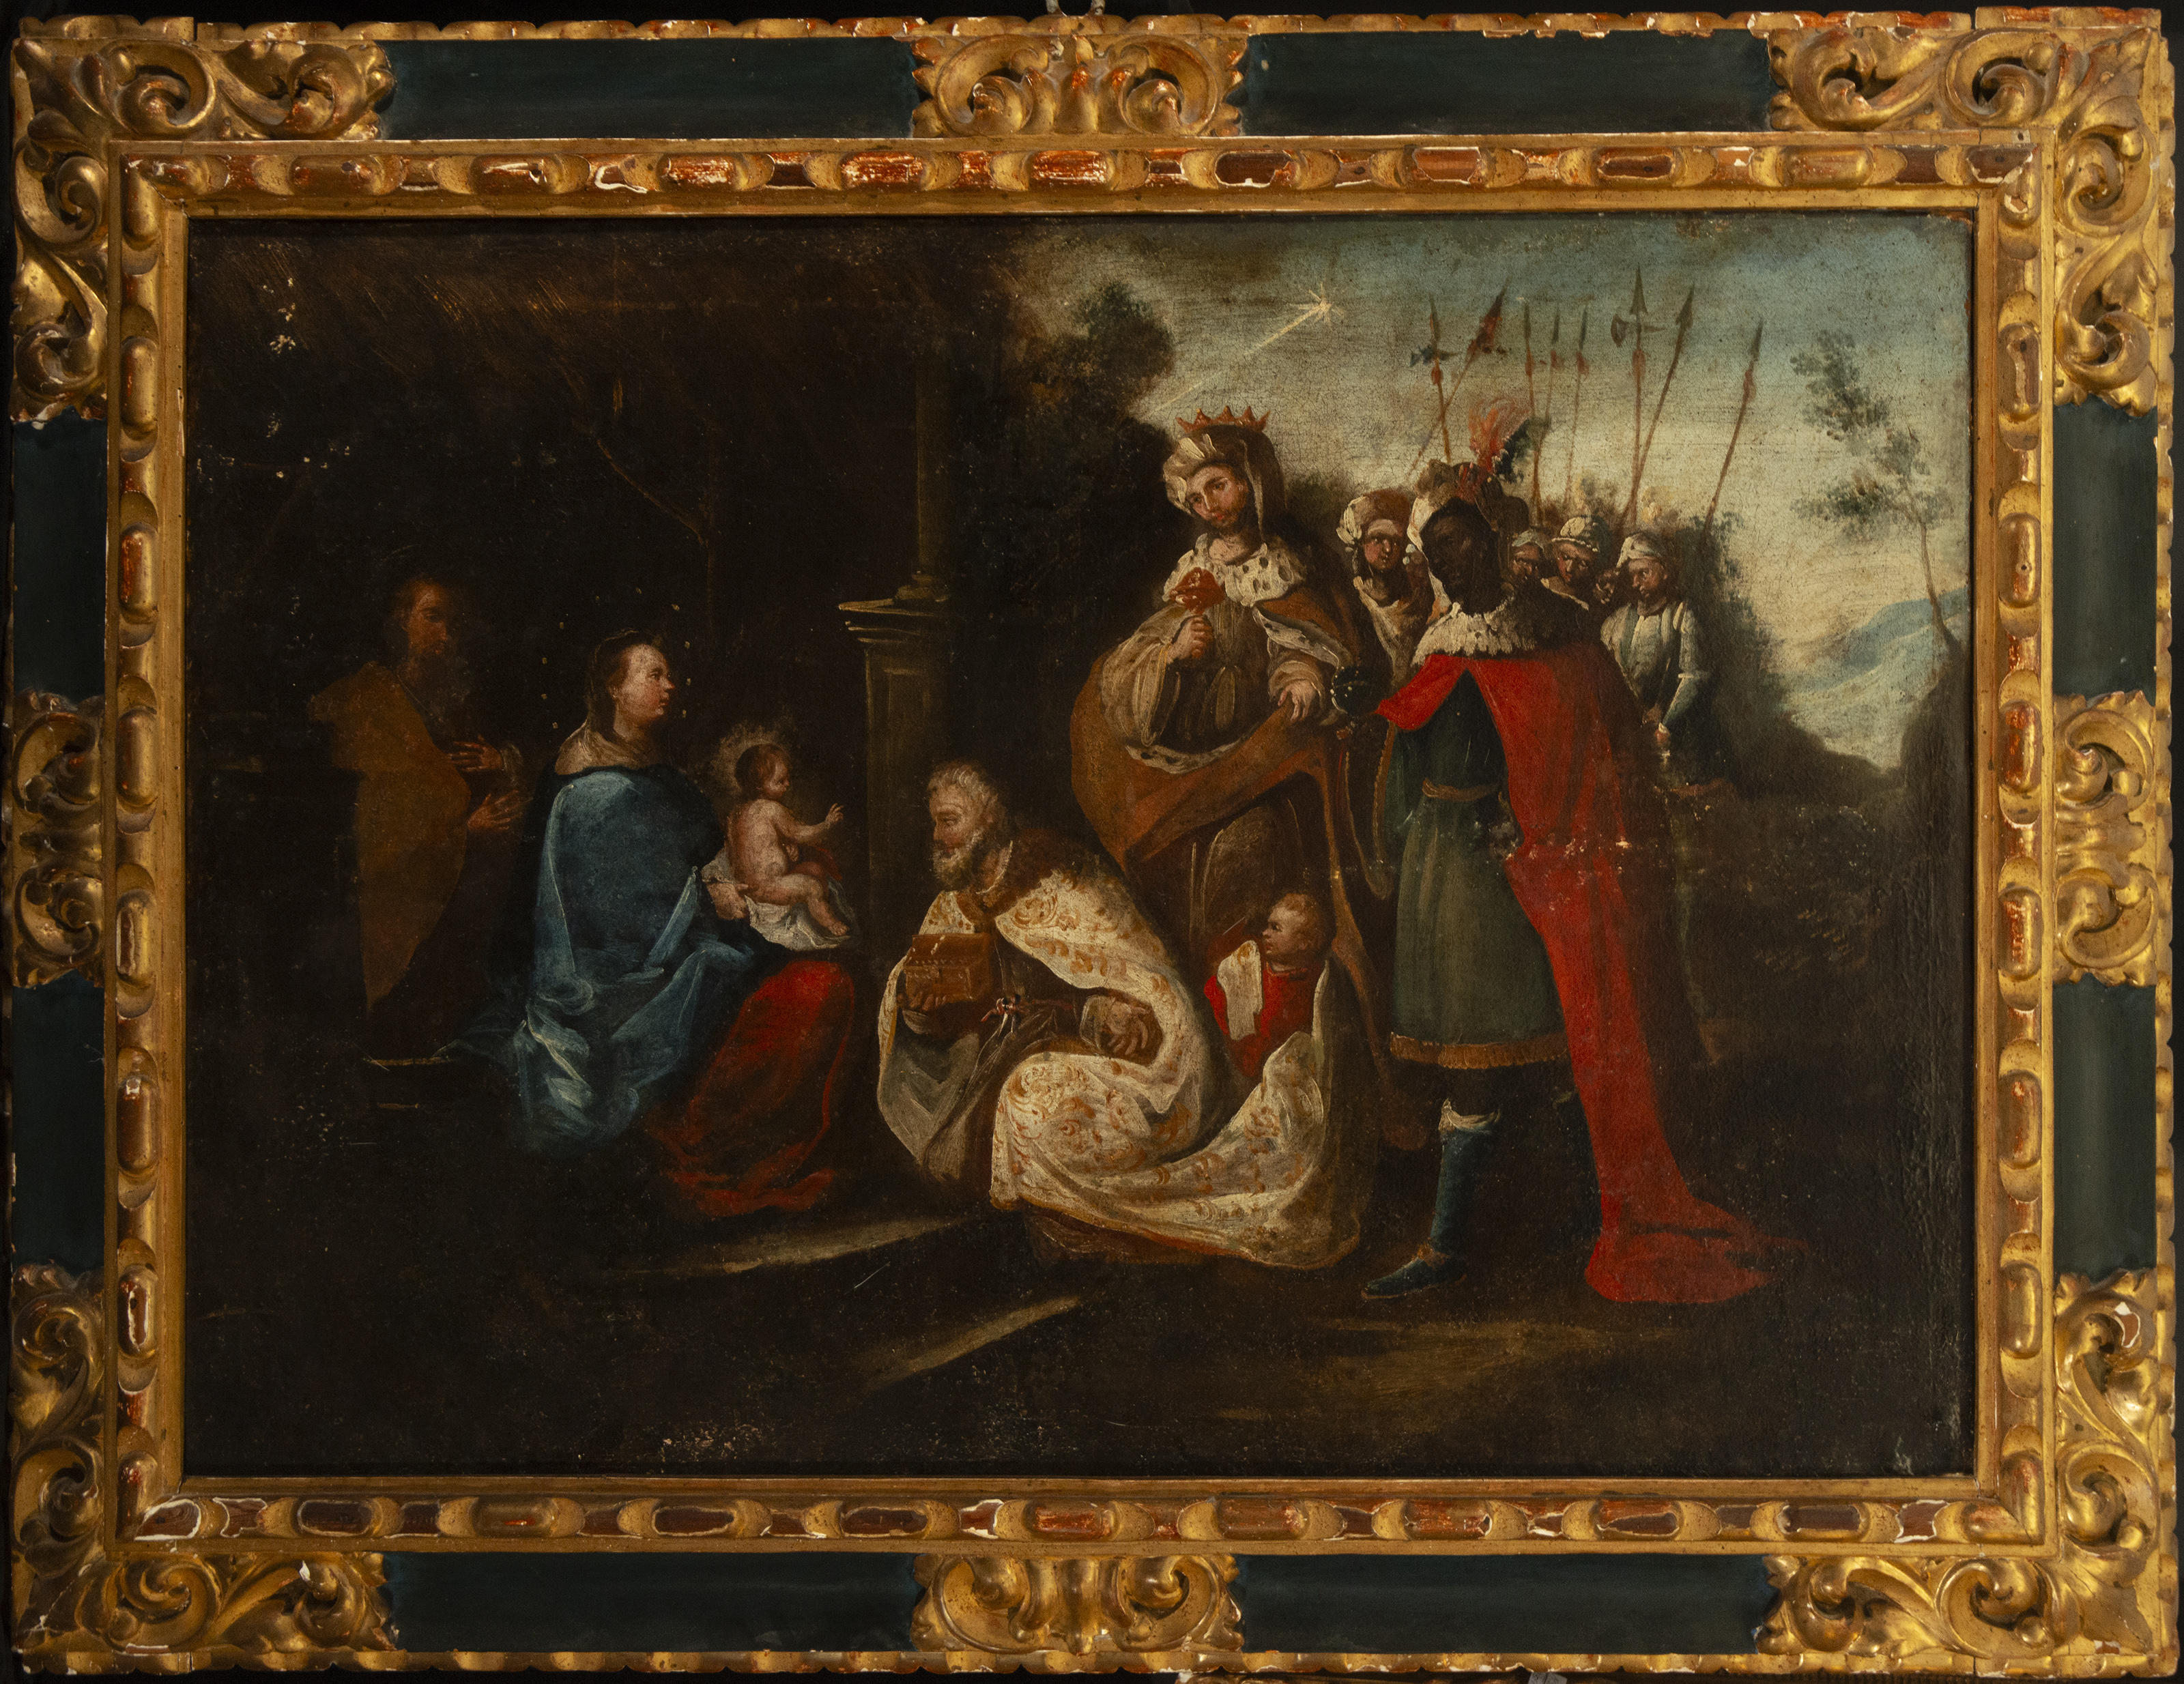 Adoration of the Three Wise Men, 18th century Andalusian school, with baroque period frame